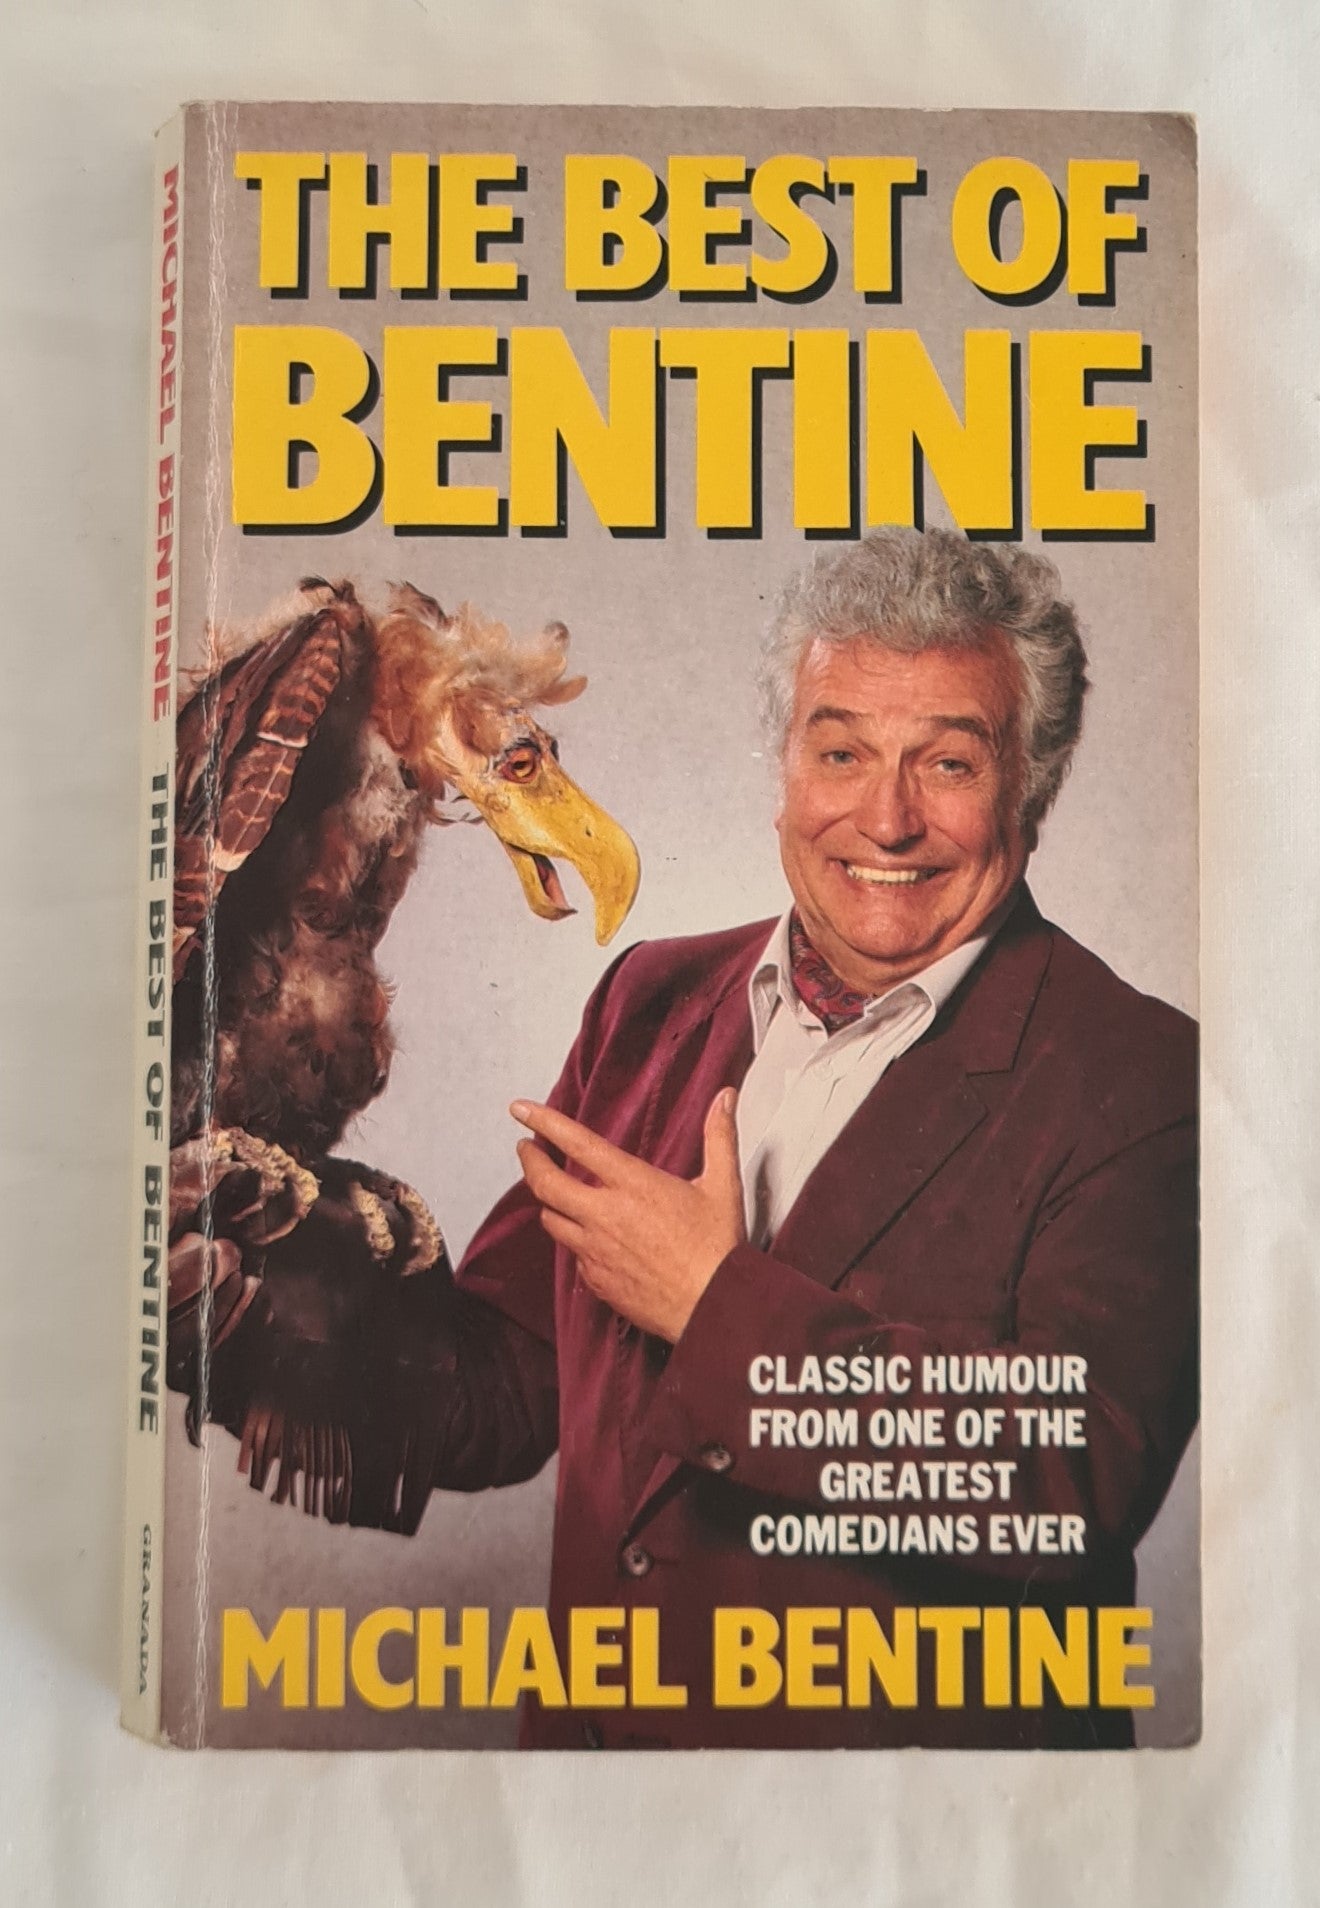 The Best of Bentine  by Michael Bentine